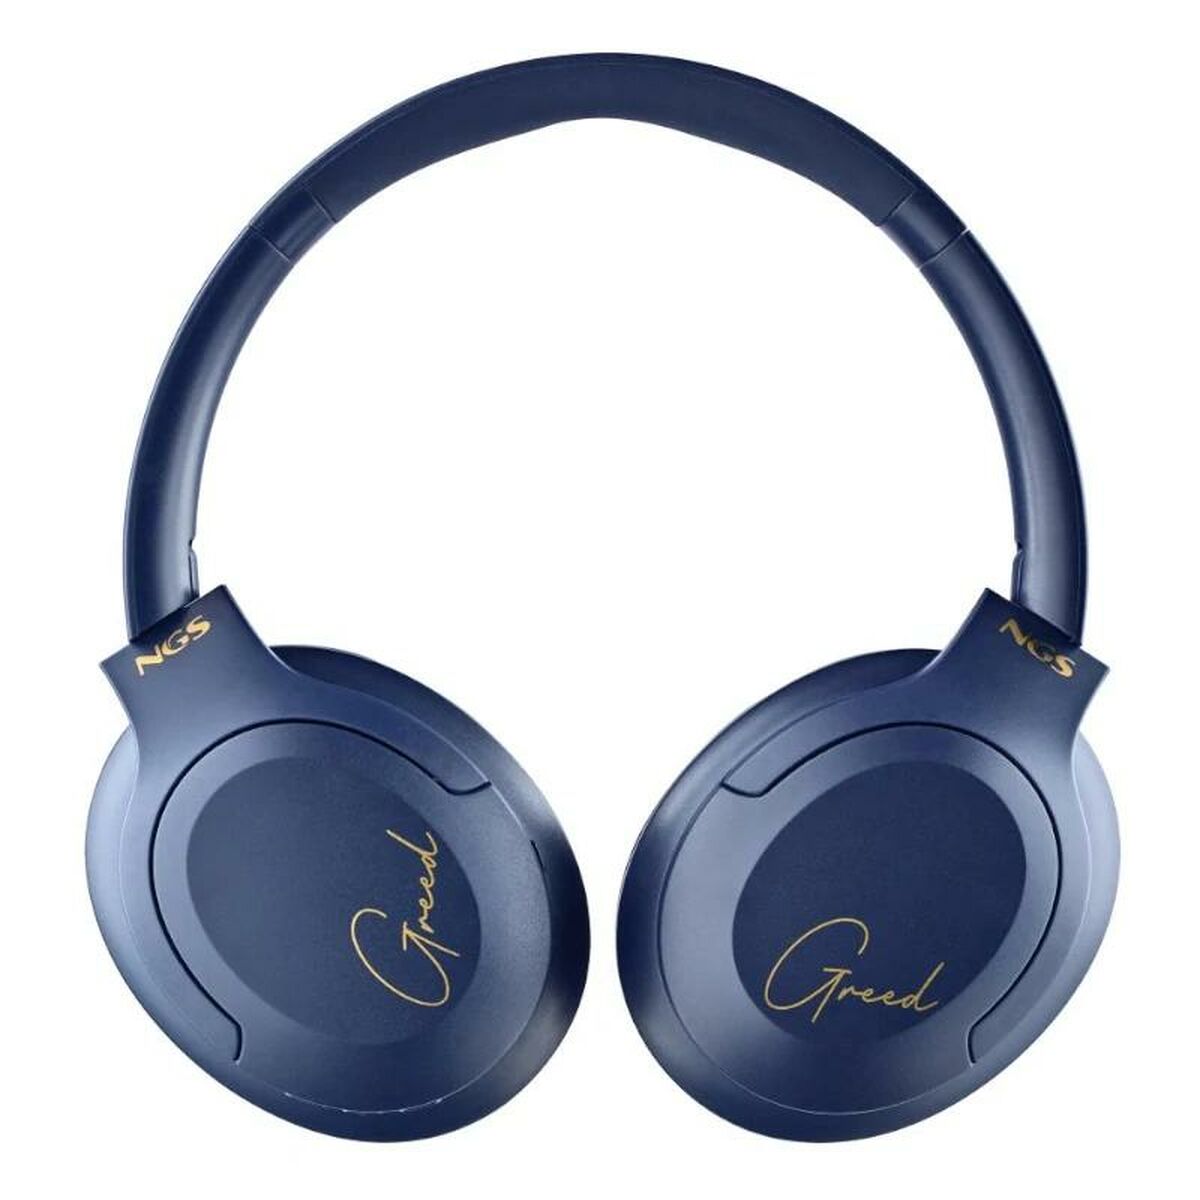 Headphones with Microphone NGS ARTICA GREED Blue